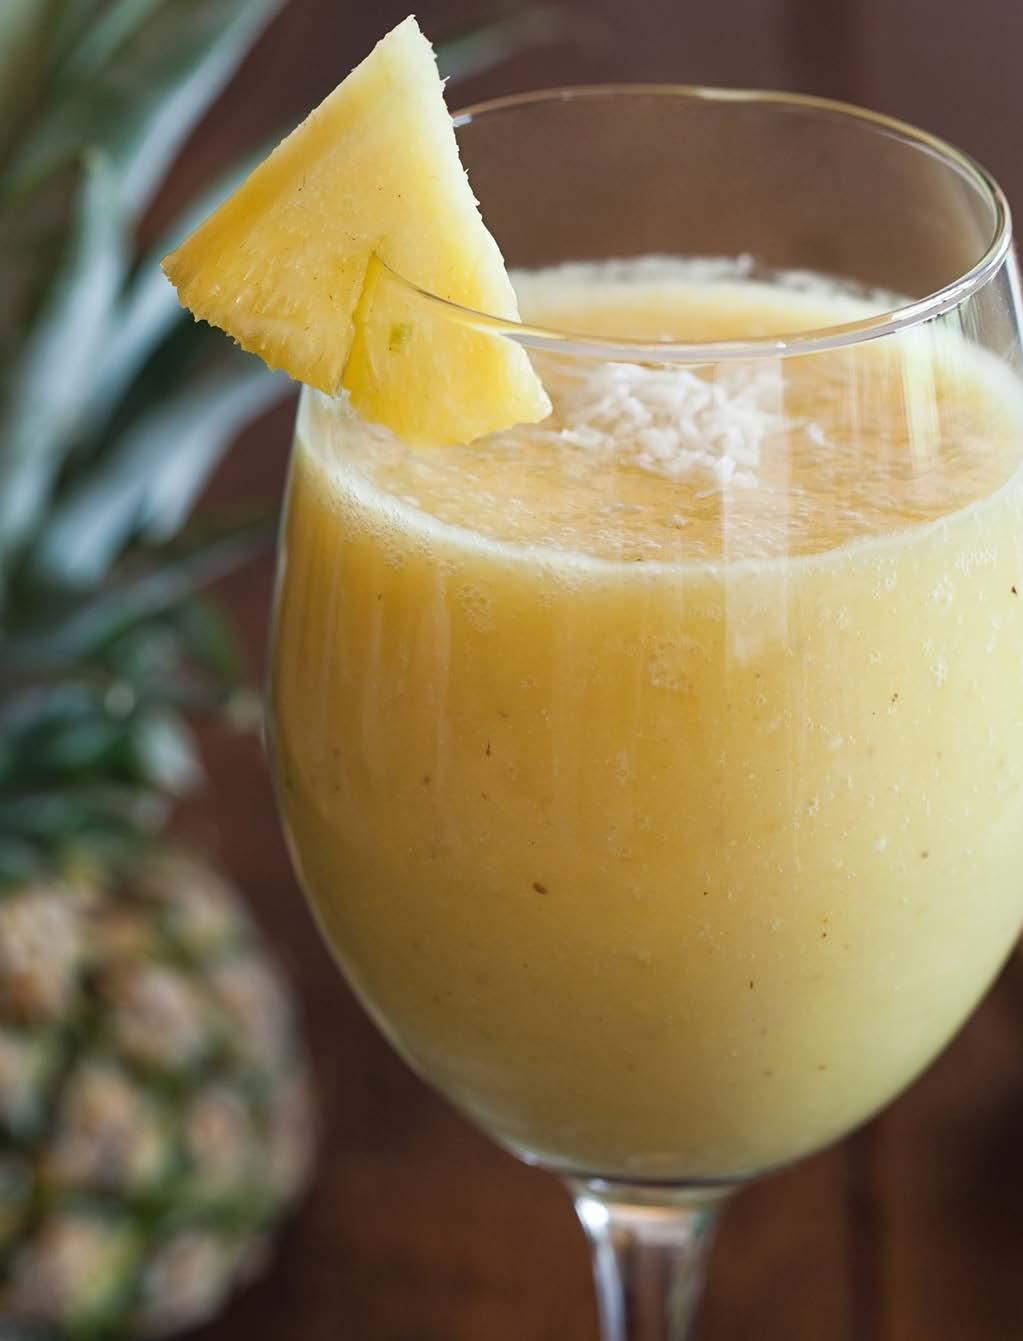 Piña Colada Smoothie Total Time: 5 minutes Serves: - cup coconut milk ½ cup frozen pineapple ½ banana ¼ cup protein powder 3 tablespoons sprouted chia